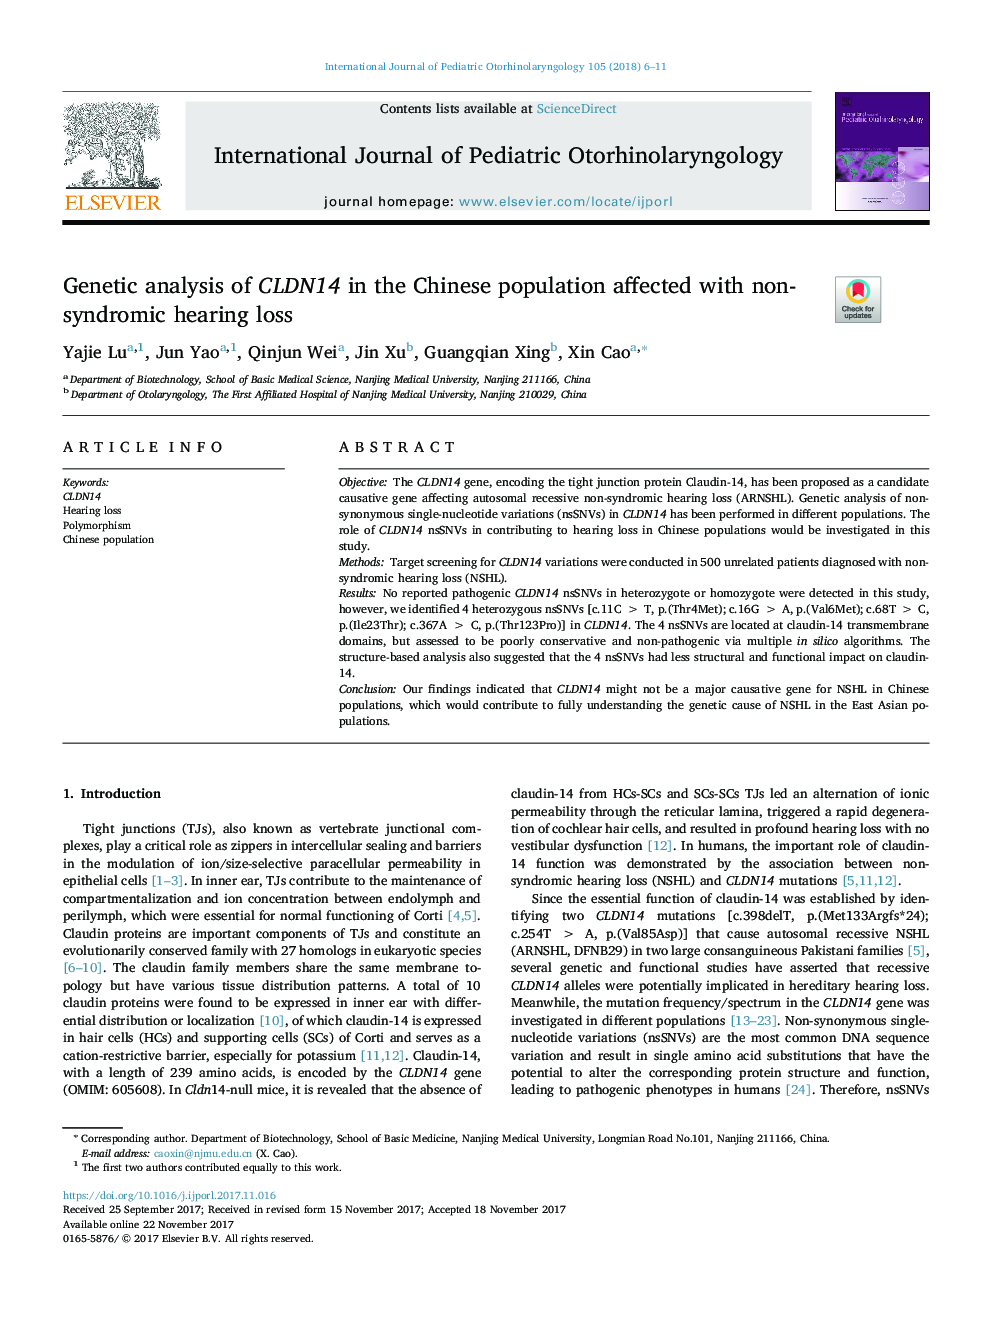 Genetic analysis of CLDN14 in the Chinese population affected with non-syndromic hearing loss